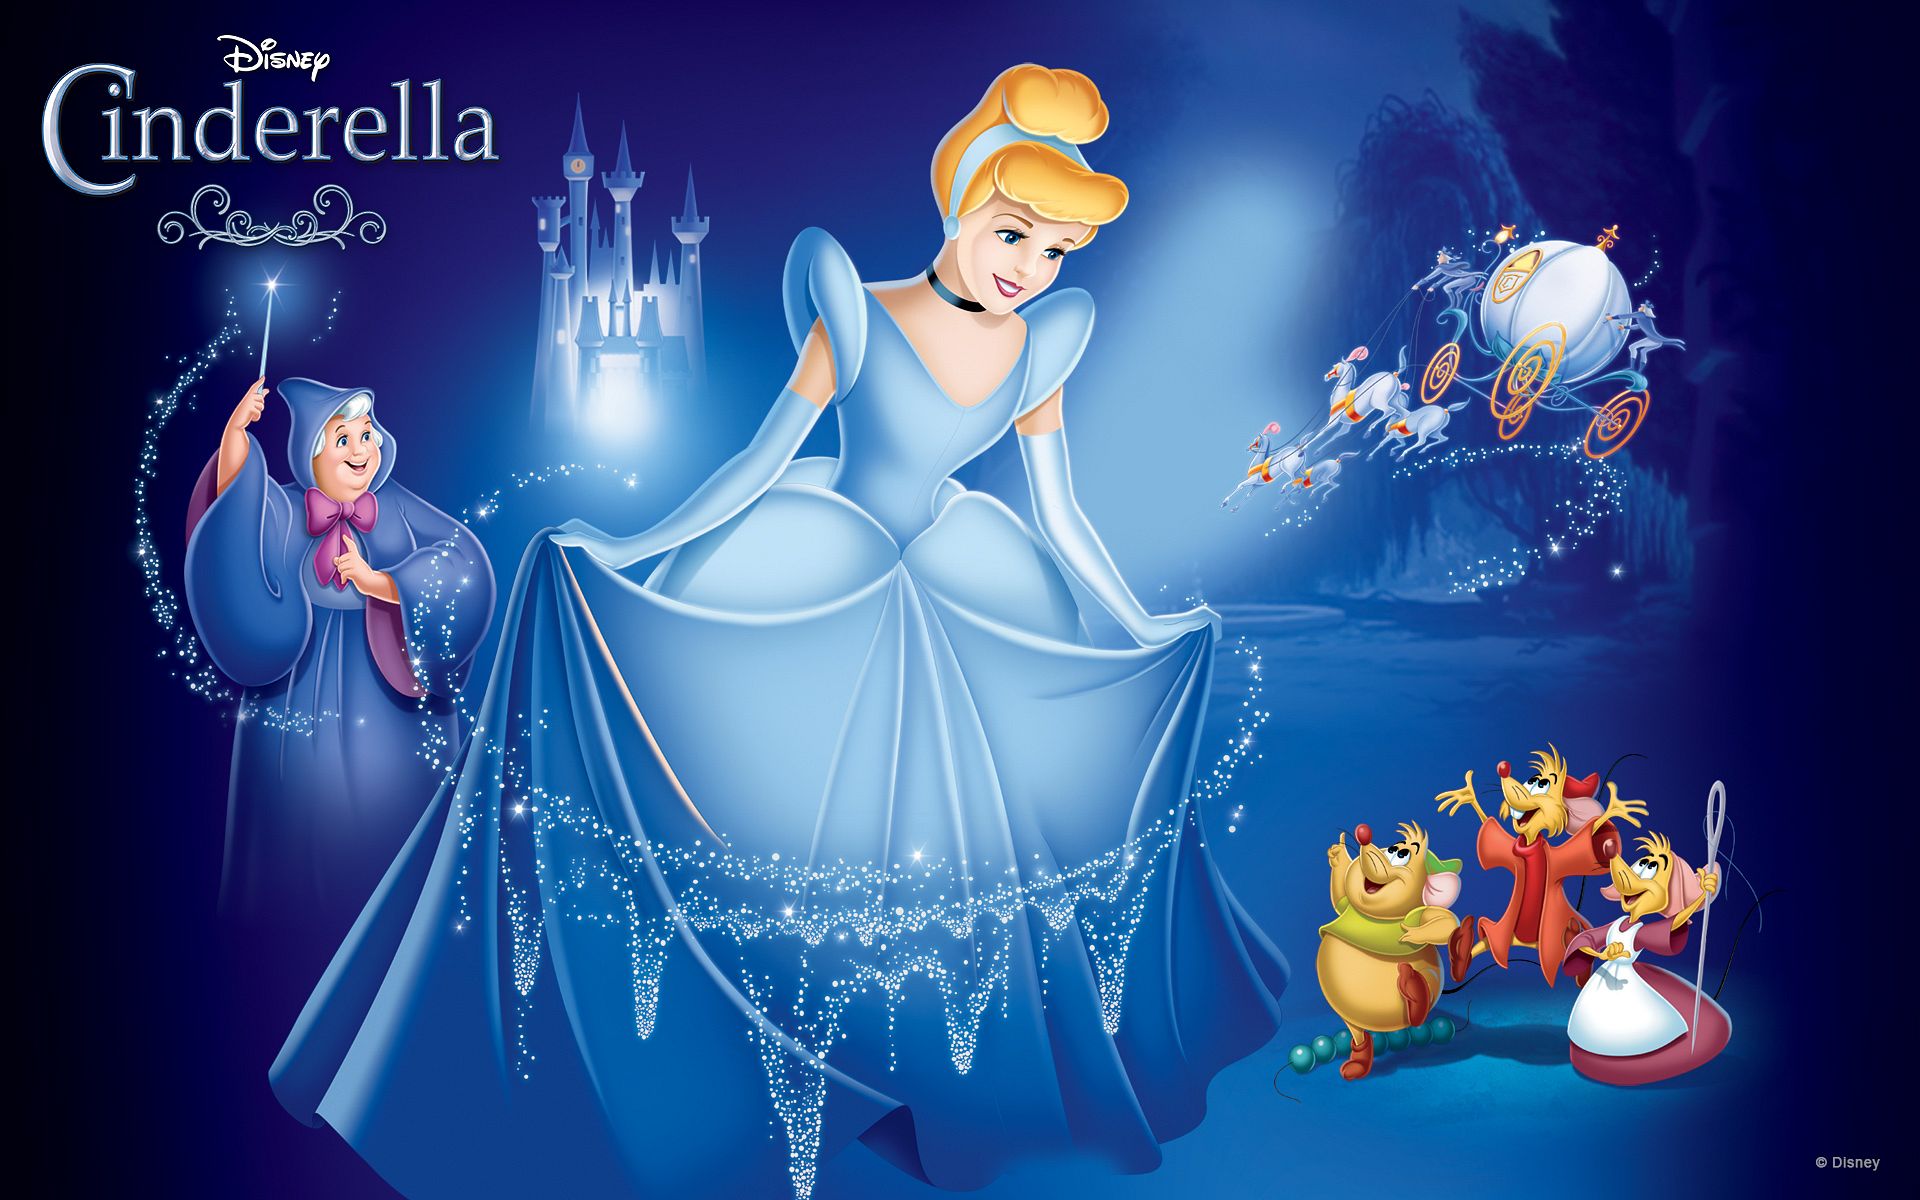  wallpaper of the castle from Disney Cinderella Cinderella after the